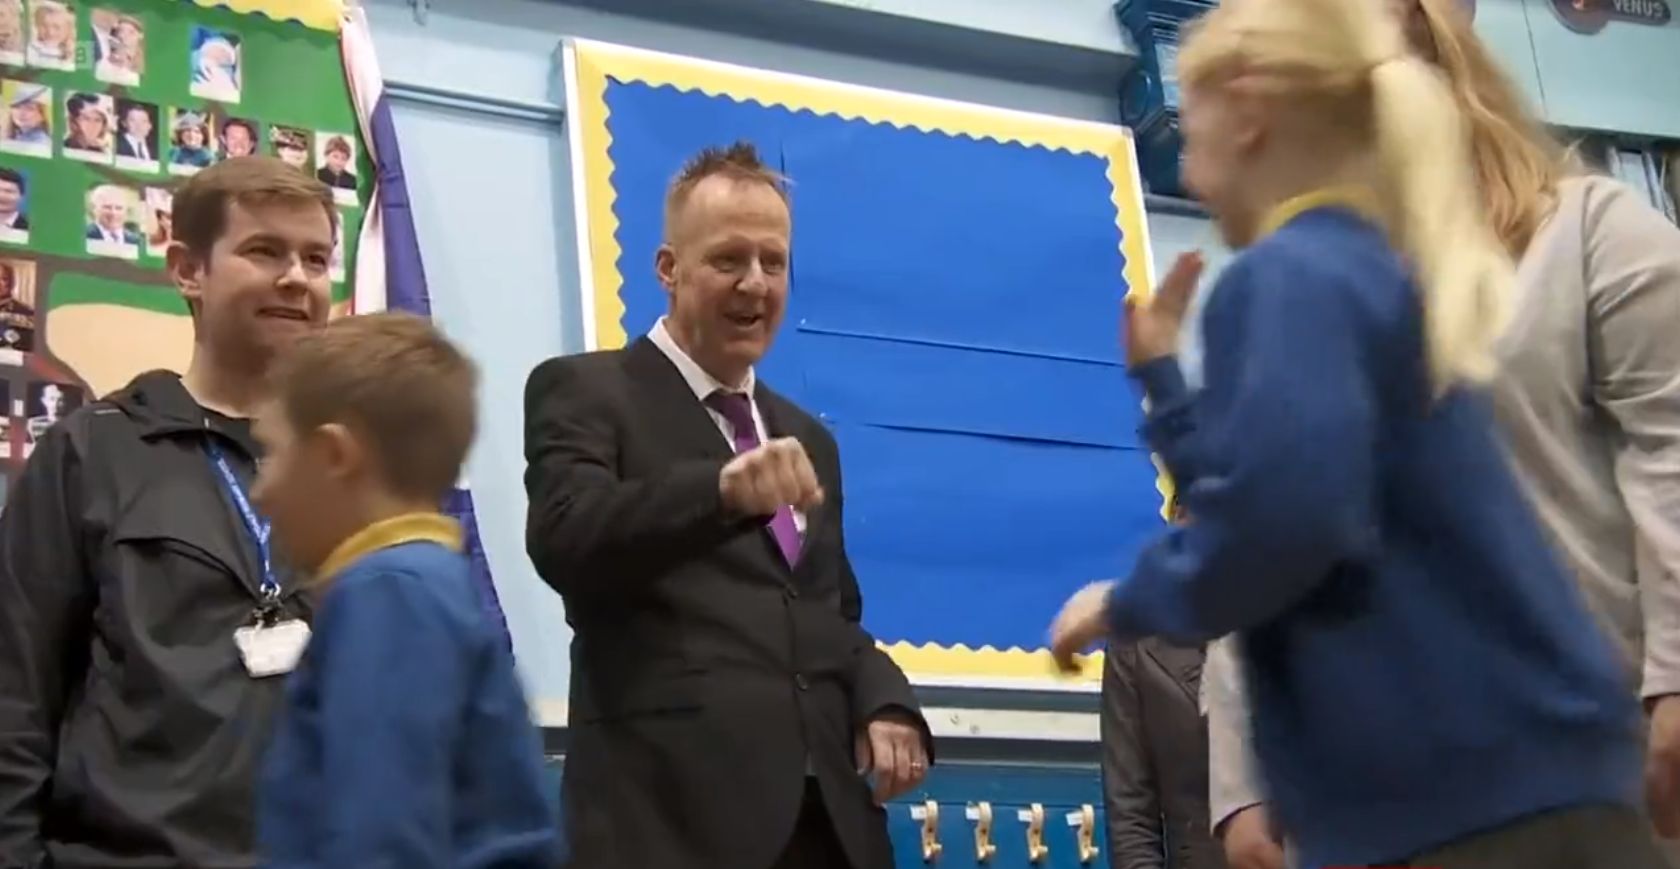 Nick Sheeran, the headteacher at Birkdale Primary School, returned to school for the first time after suffering a cardiac arrest on the last day of term. Photo by BBC Breakfast